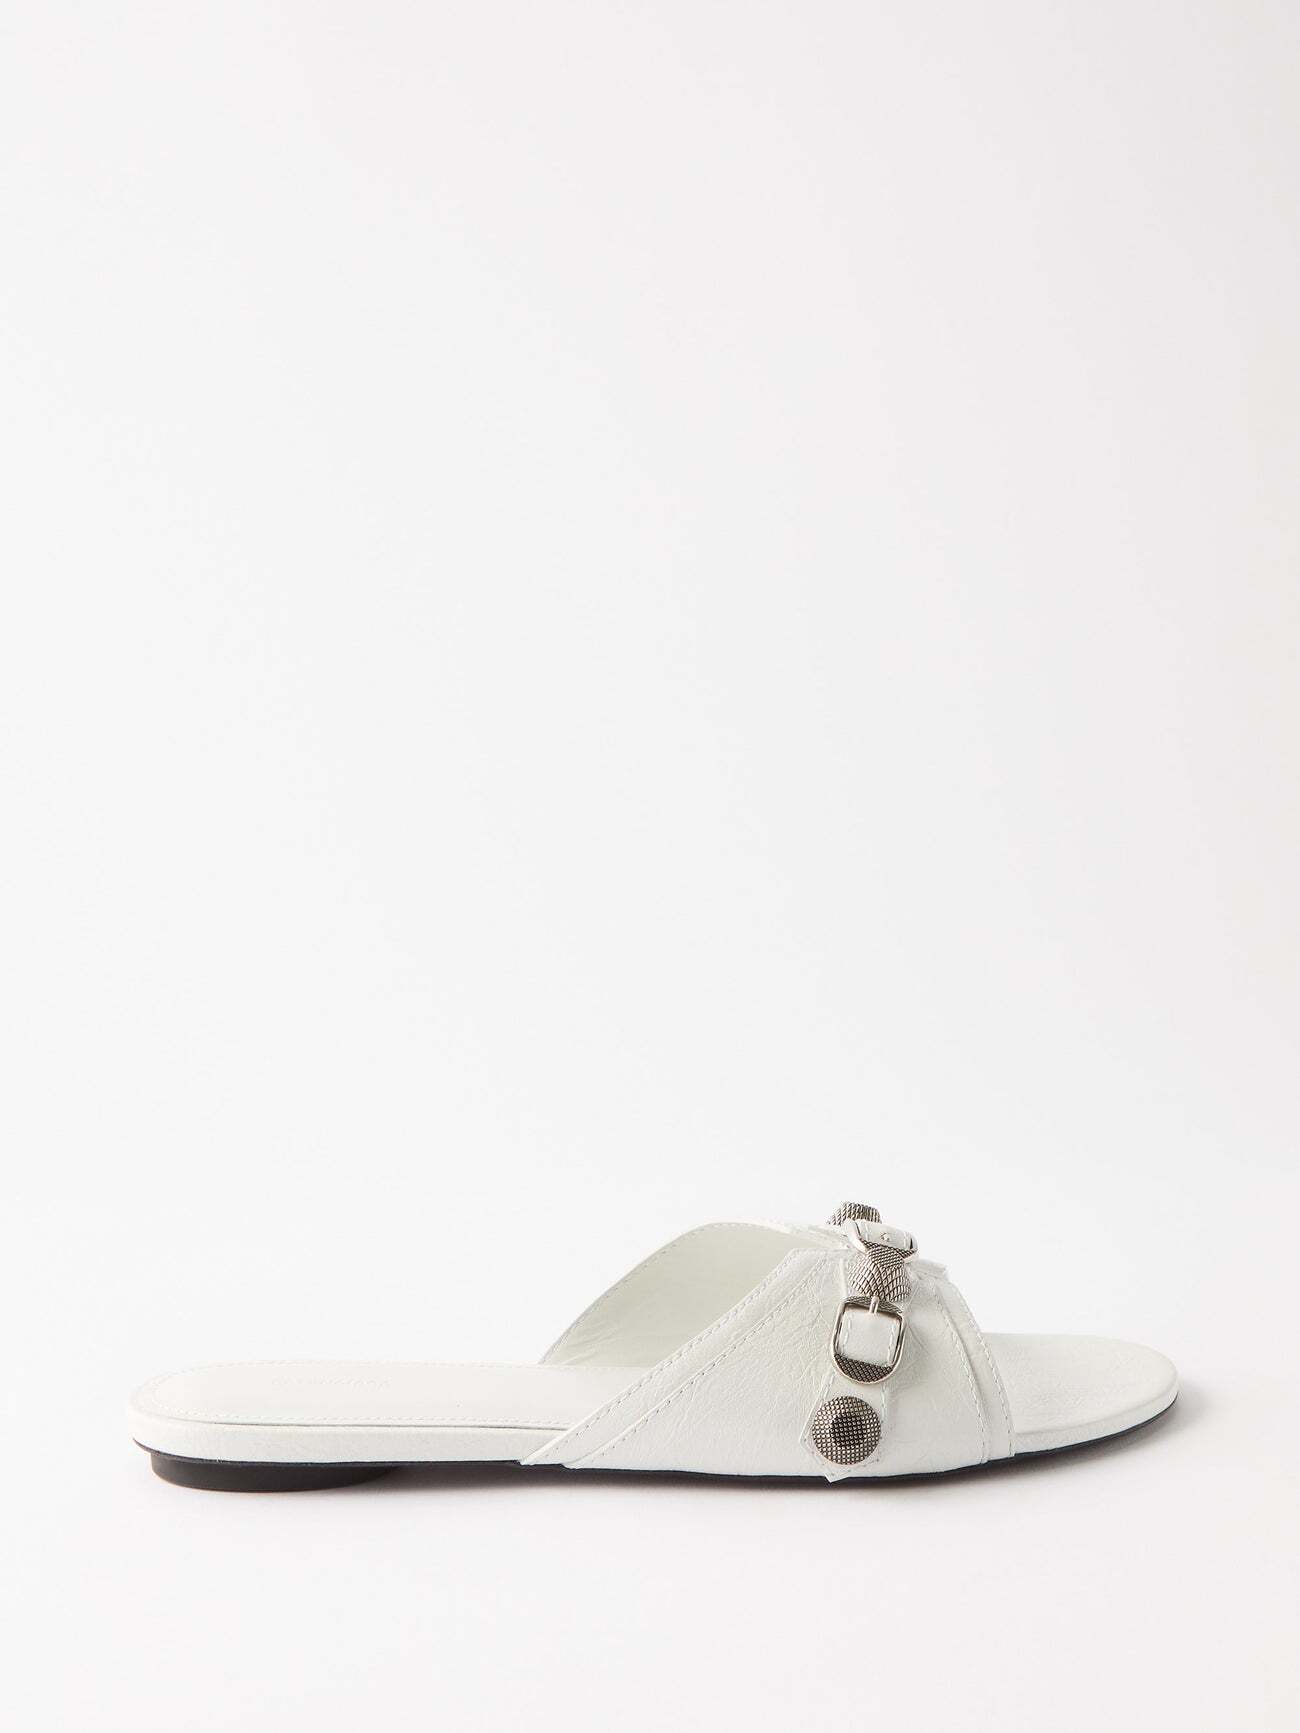 Balenciaga - Cagole Studded Leather Sandals - Womens - White